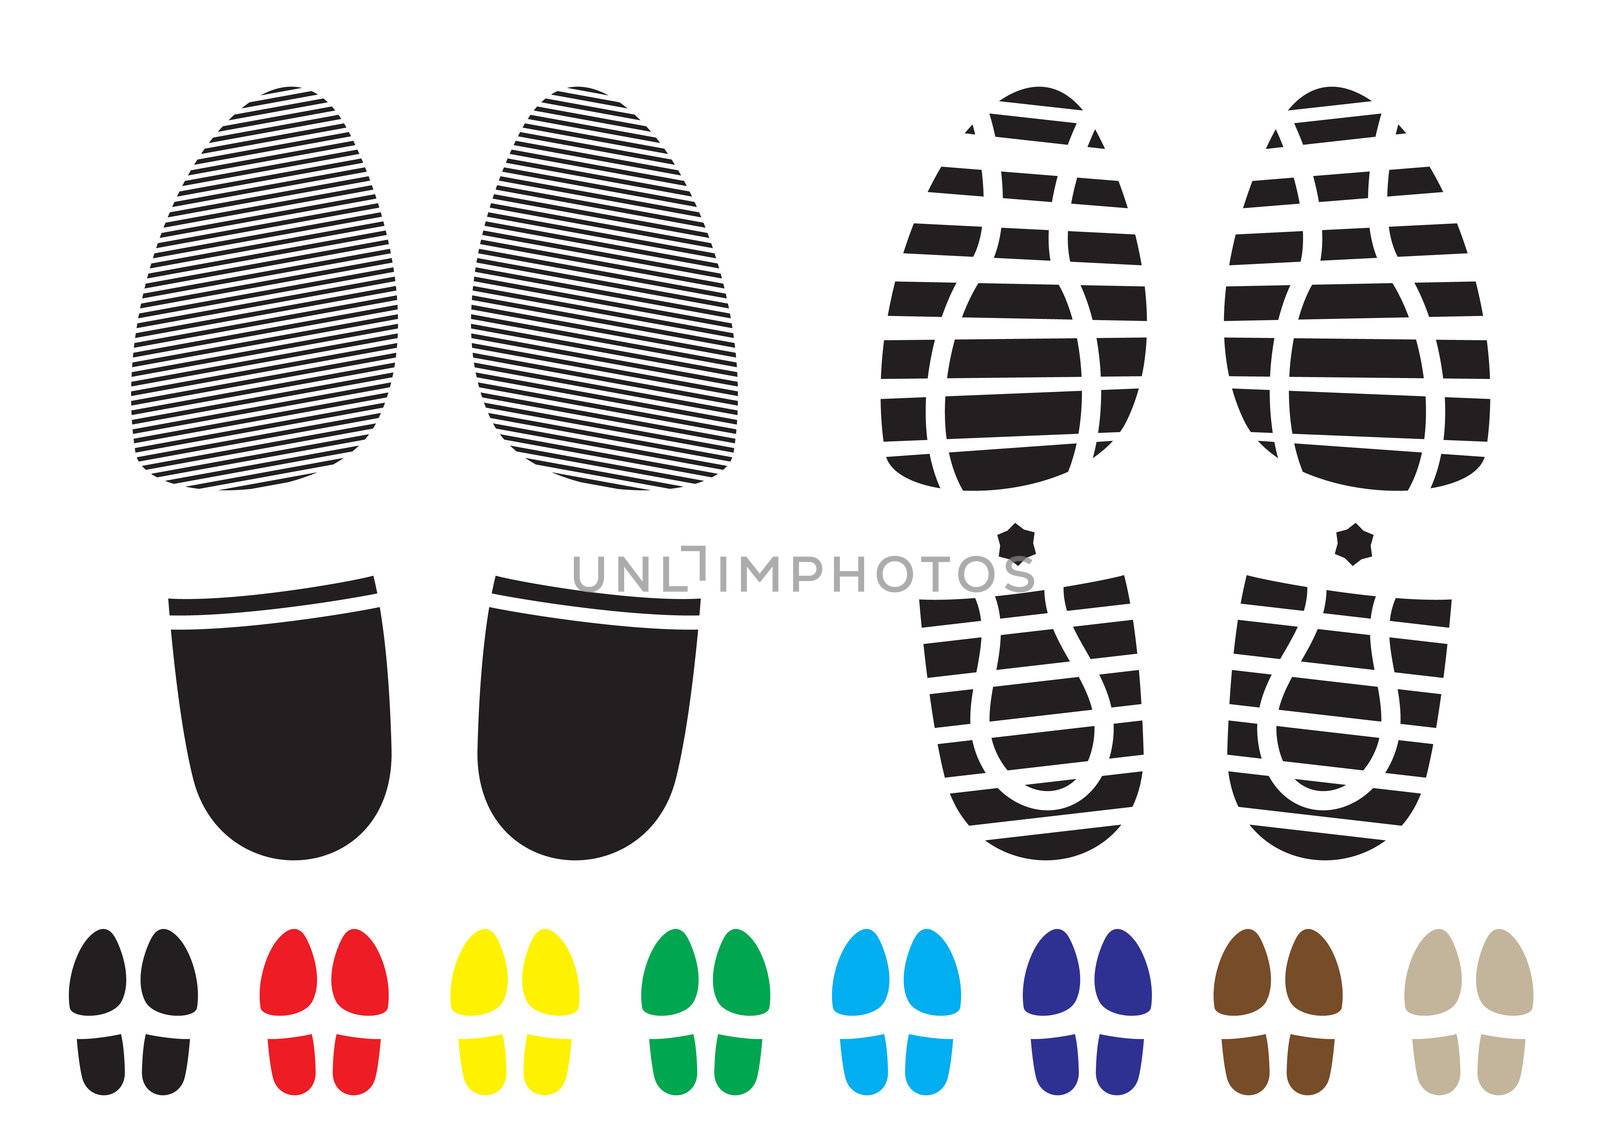 shoe print pattern with outline and template samples